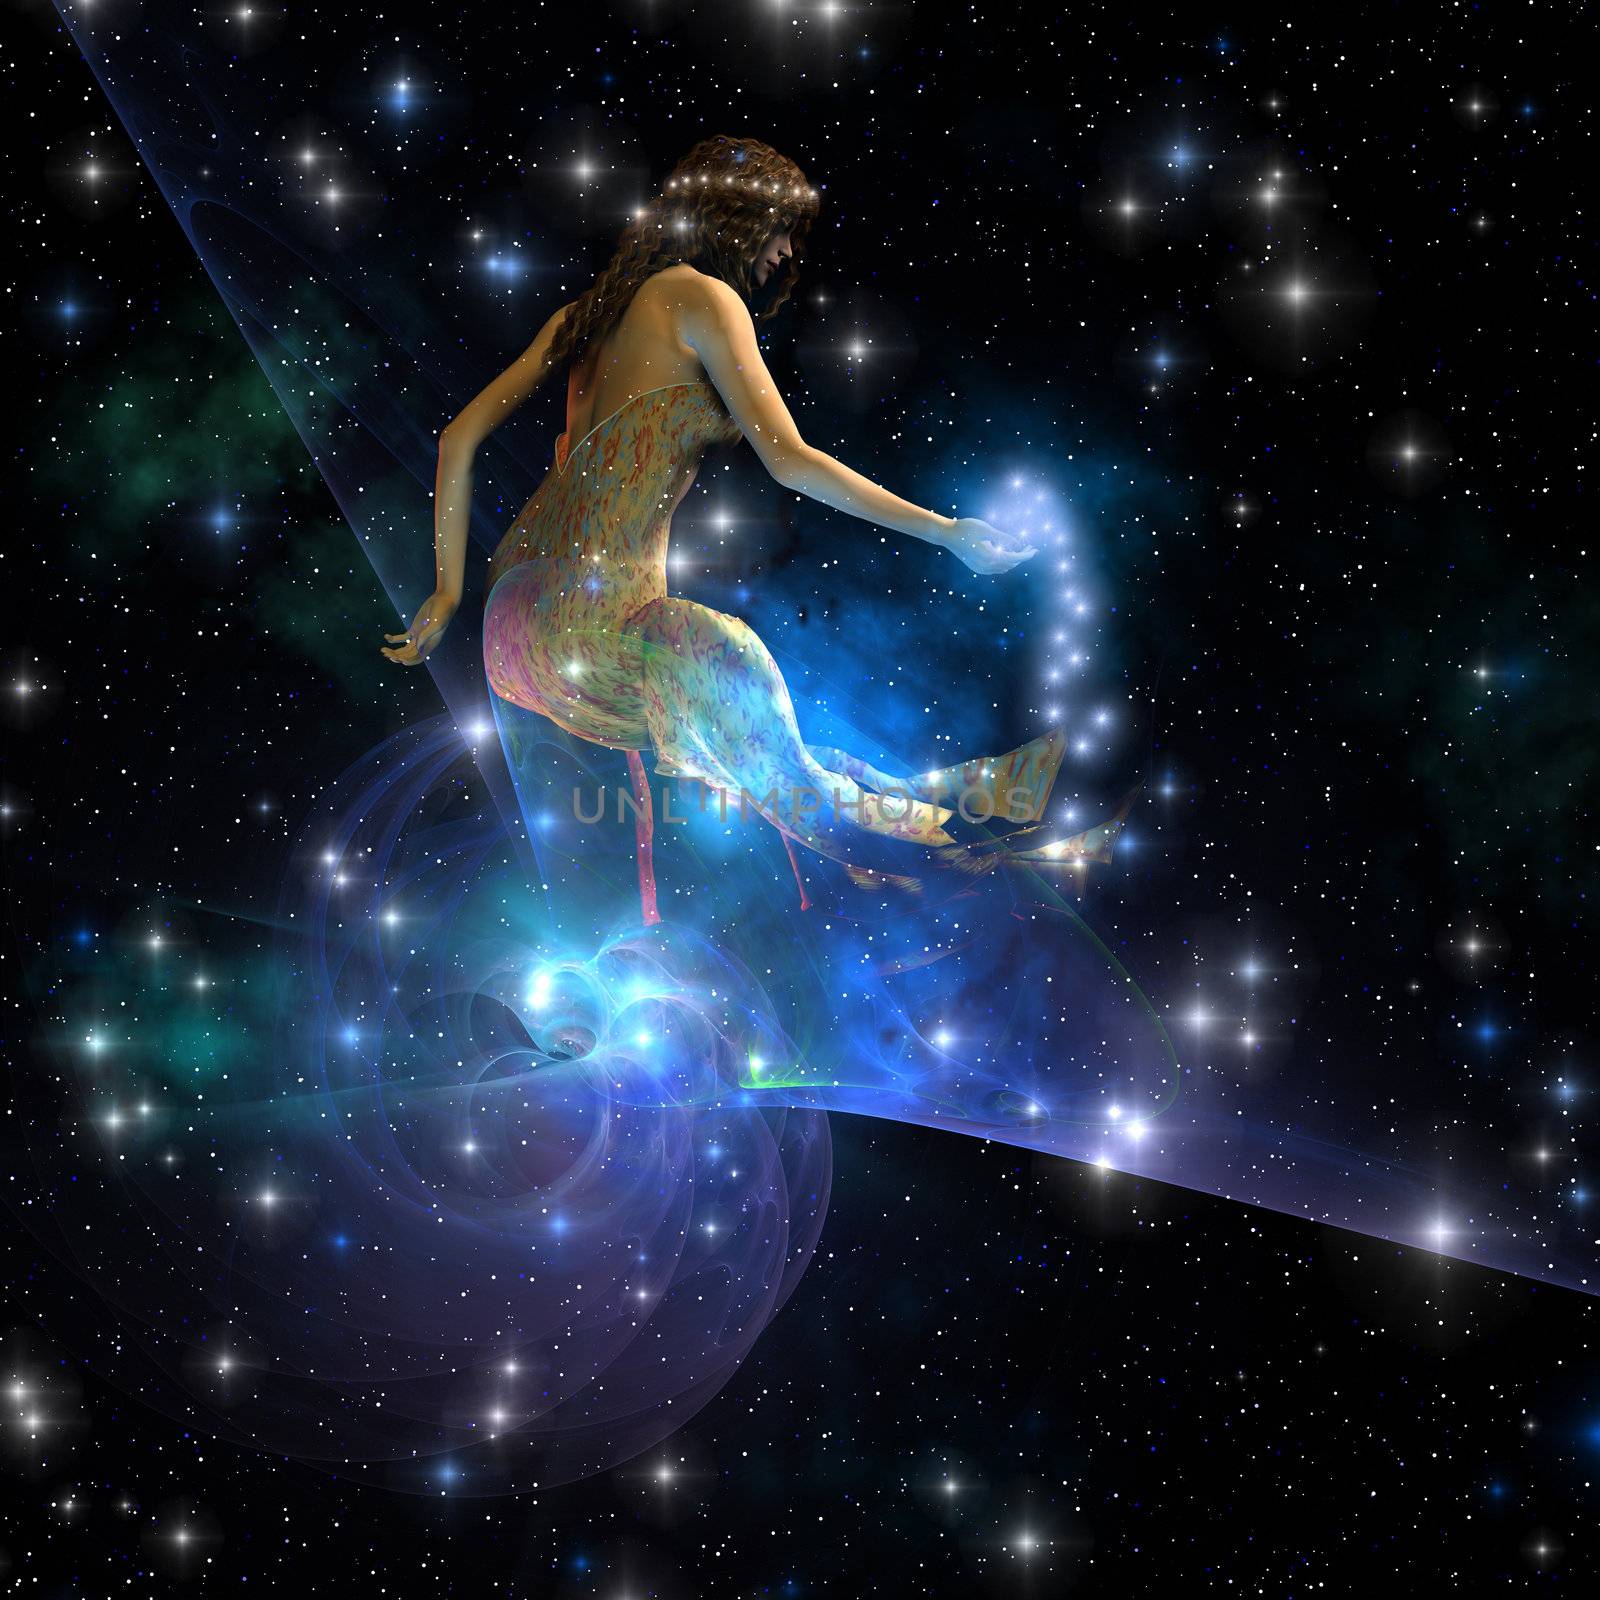 Celesta, spirit creature of the universe, spreads stars throughout the cosmos.